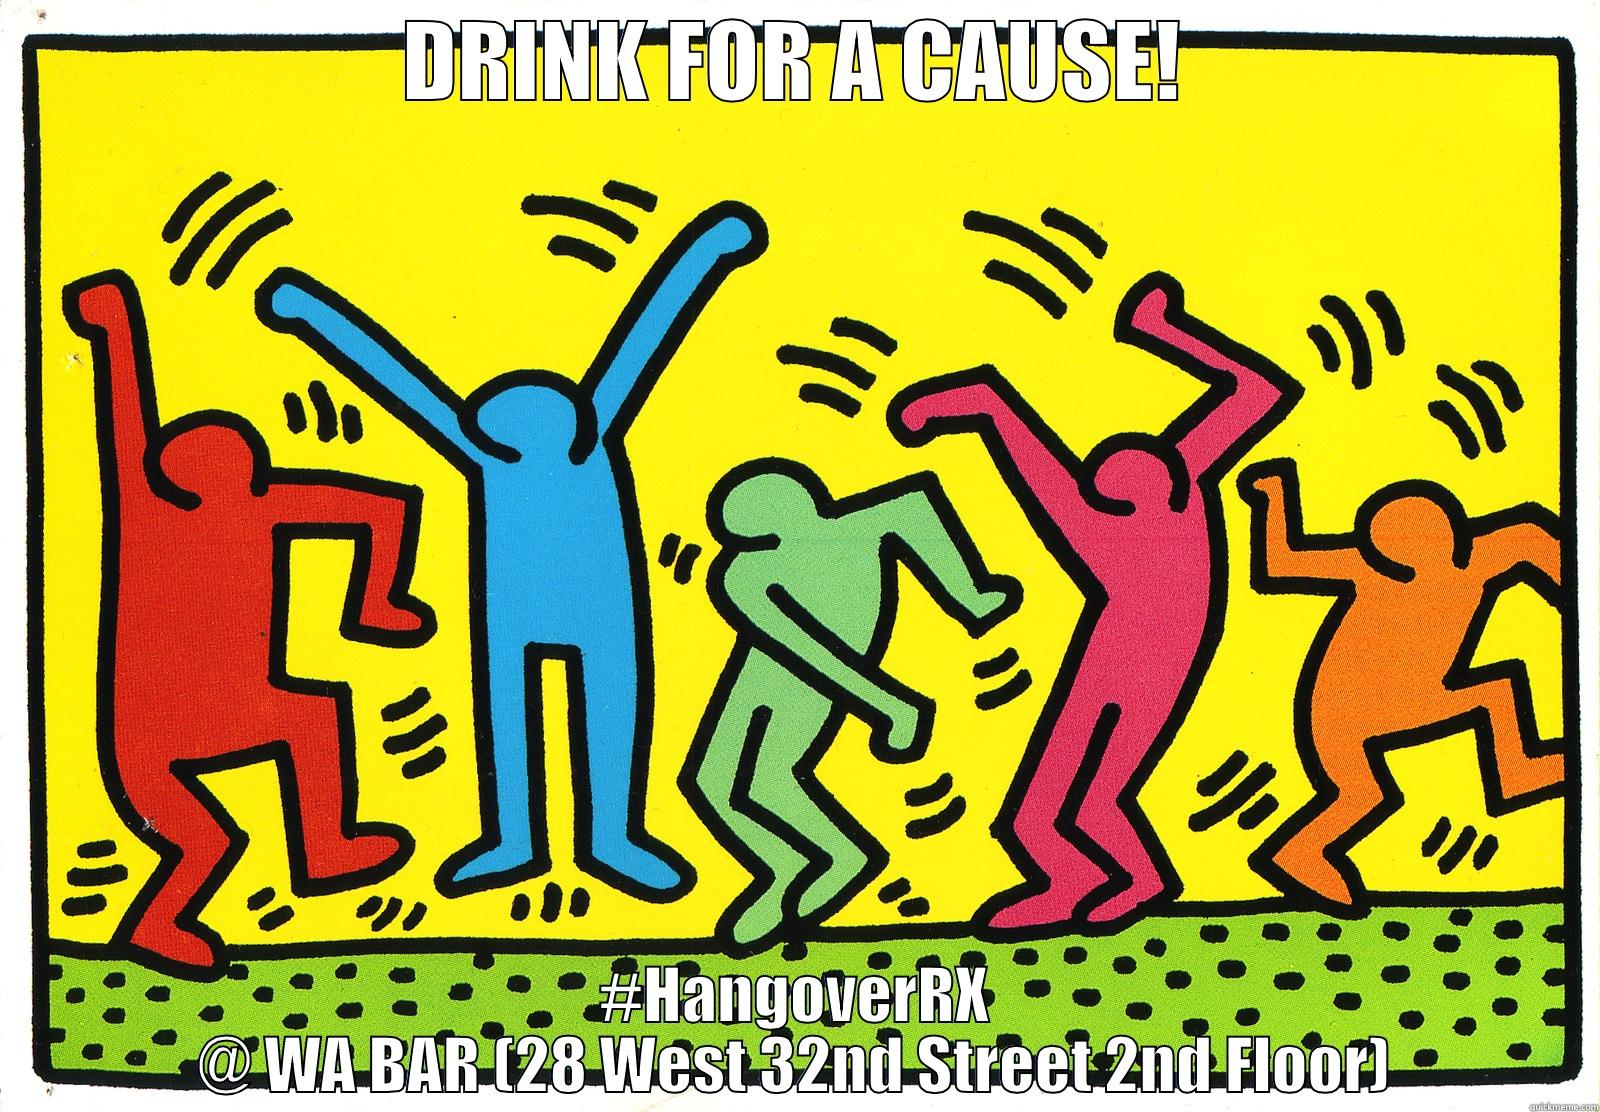 act up, fight aids! - DRINK FOR A CAUSE! #HANGOVERRX @ WA BAR (28 WEST 32ND STREET 2ND FLOOR) Misc